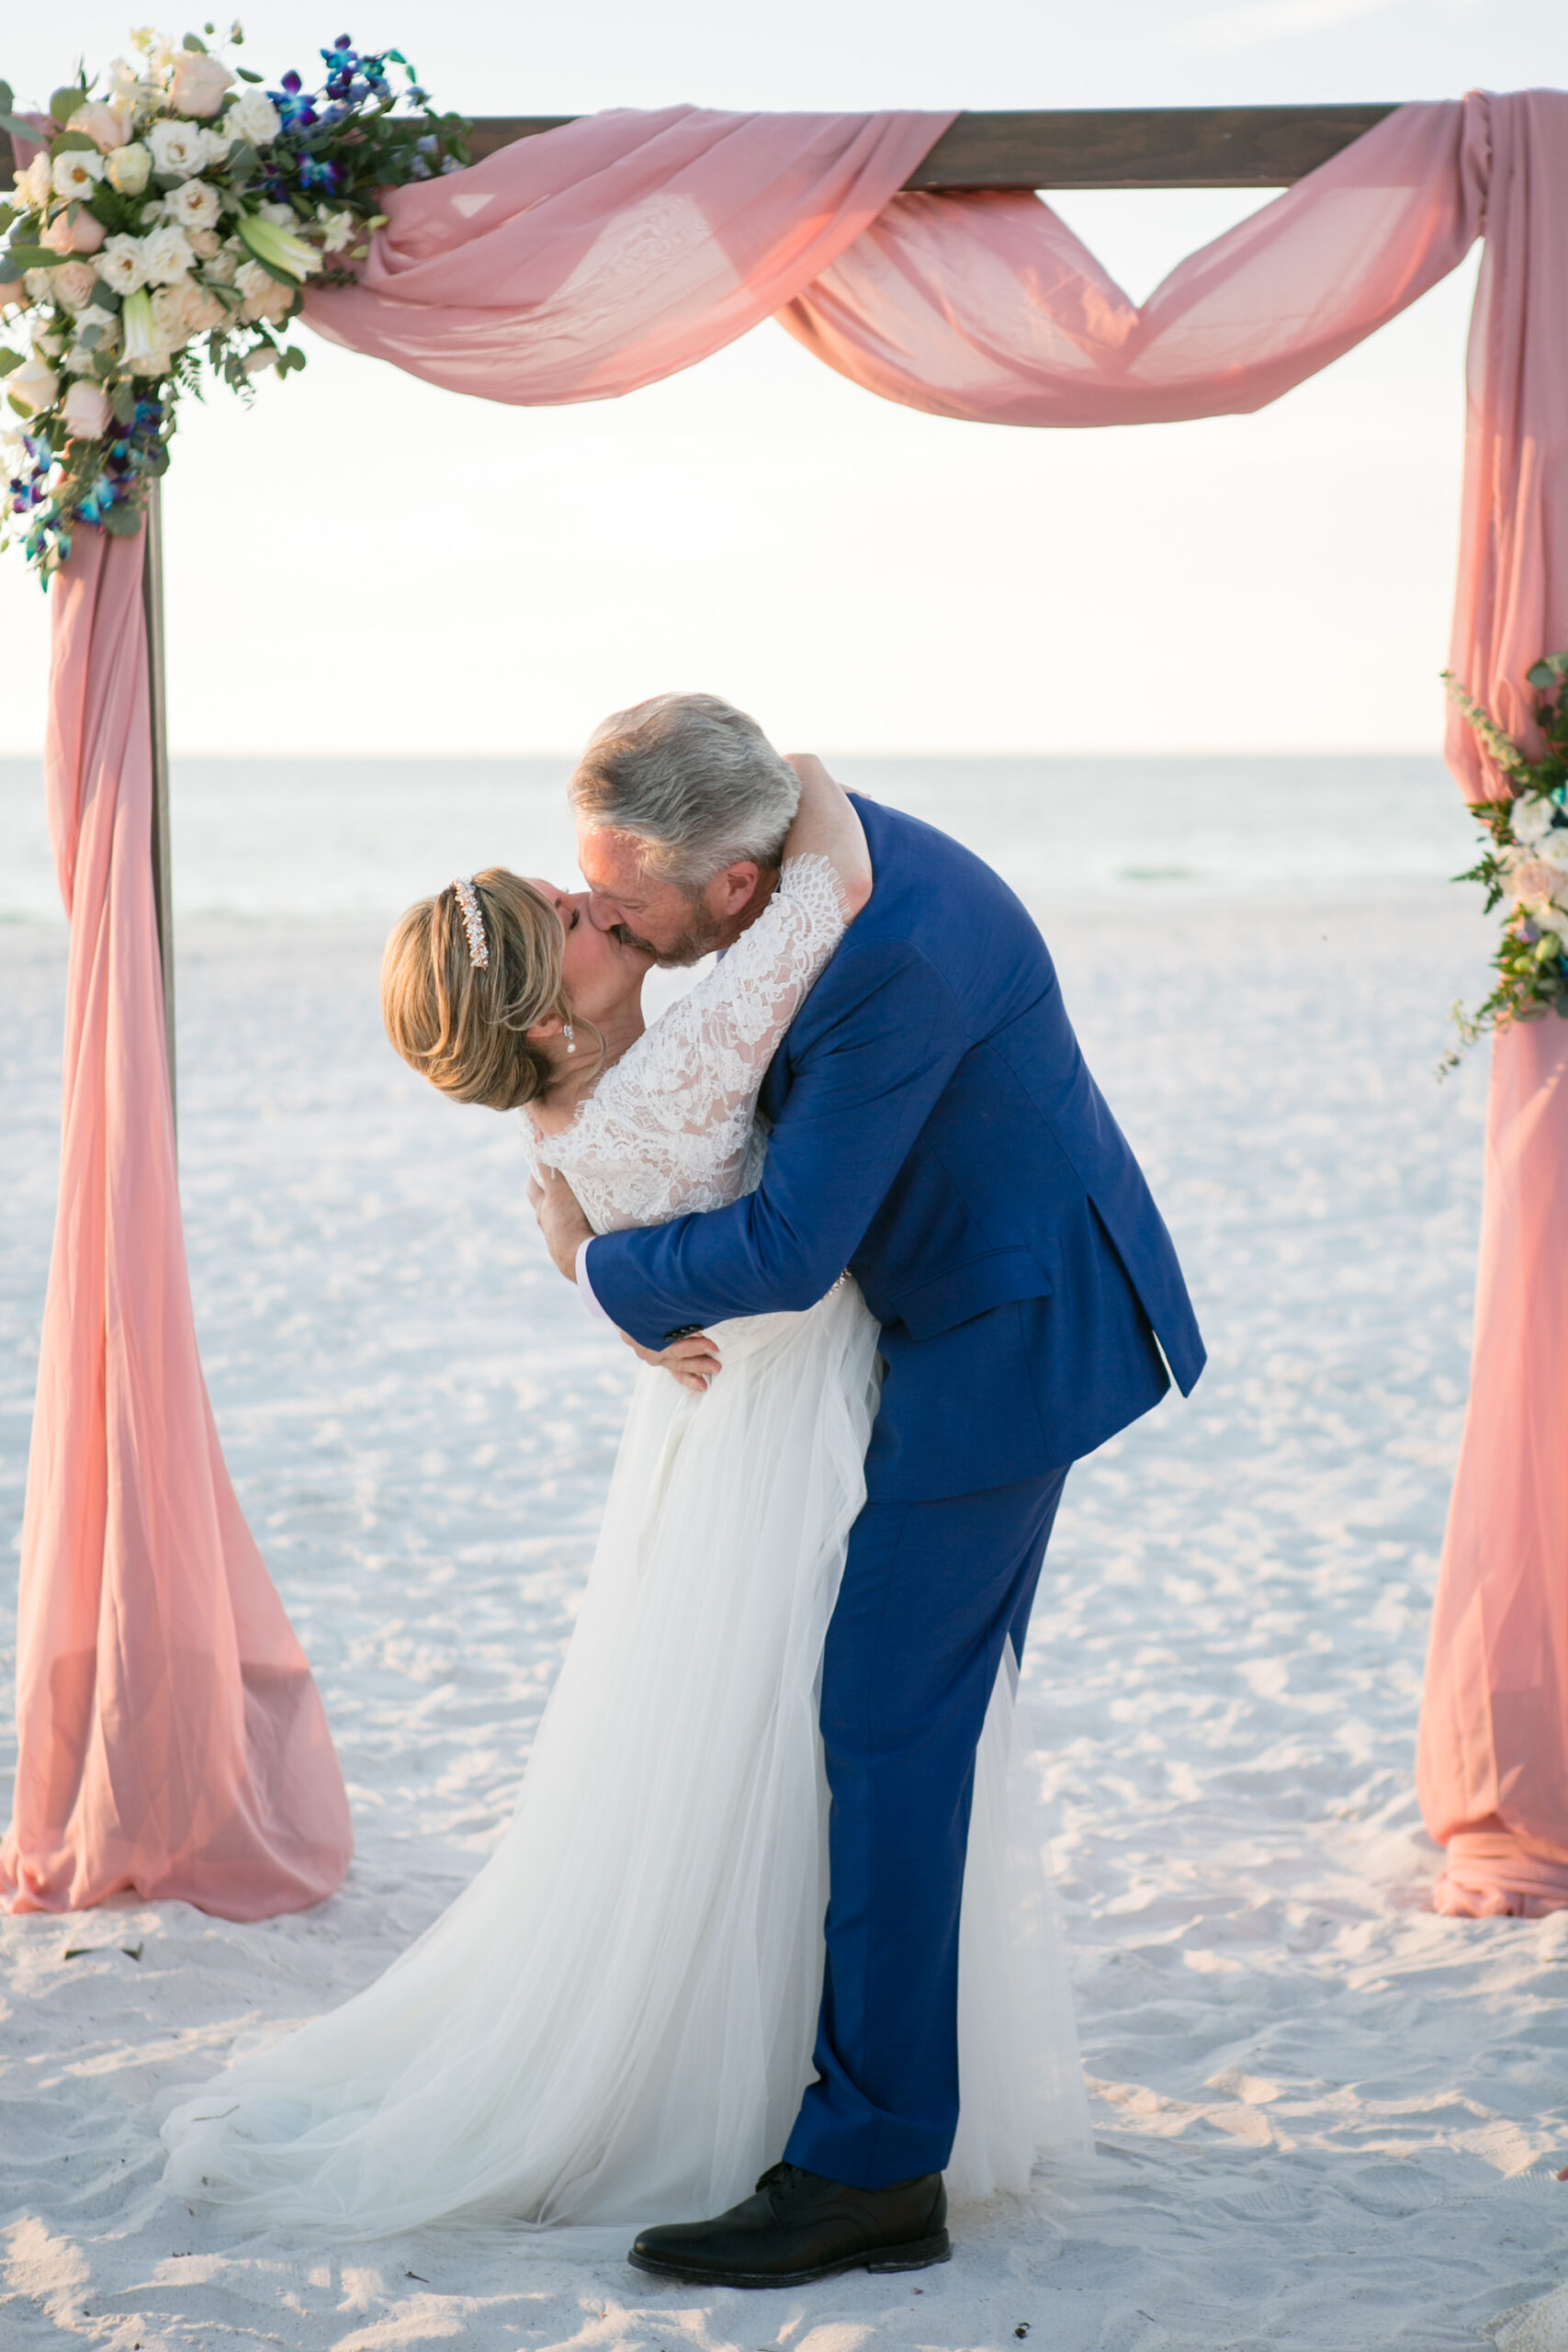 Classic Bride and Groom Kissing on Beach Wedding Ceremony Wedding Portrait | Tampa Bay Wedding Photographer Carrie Wildes Photography